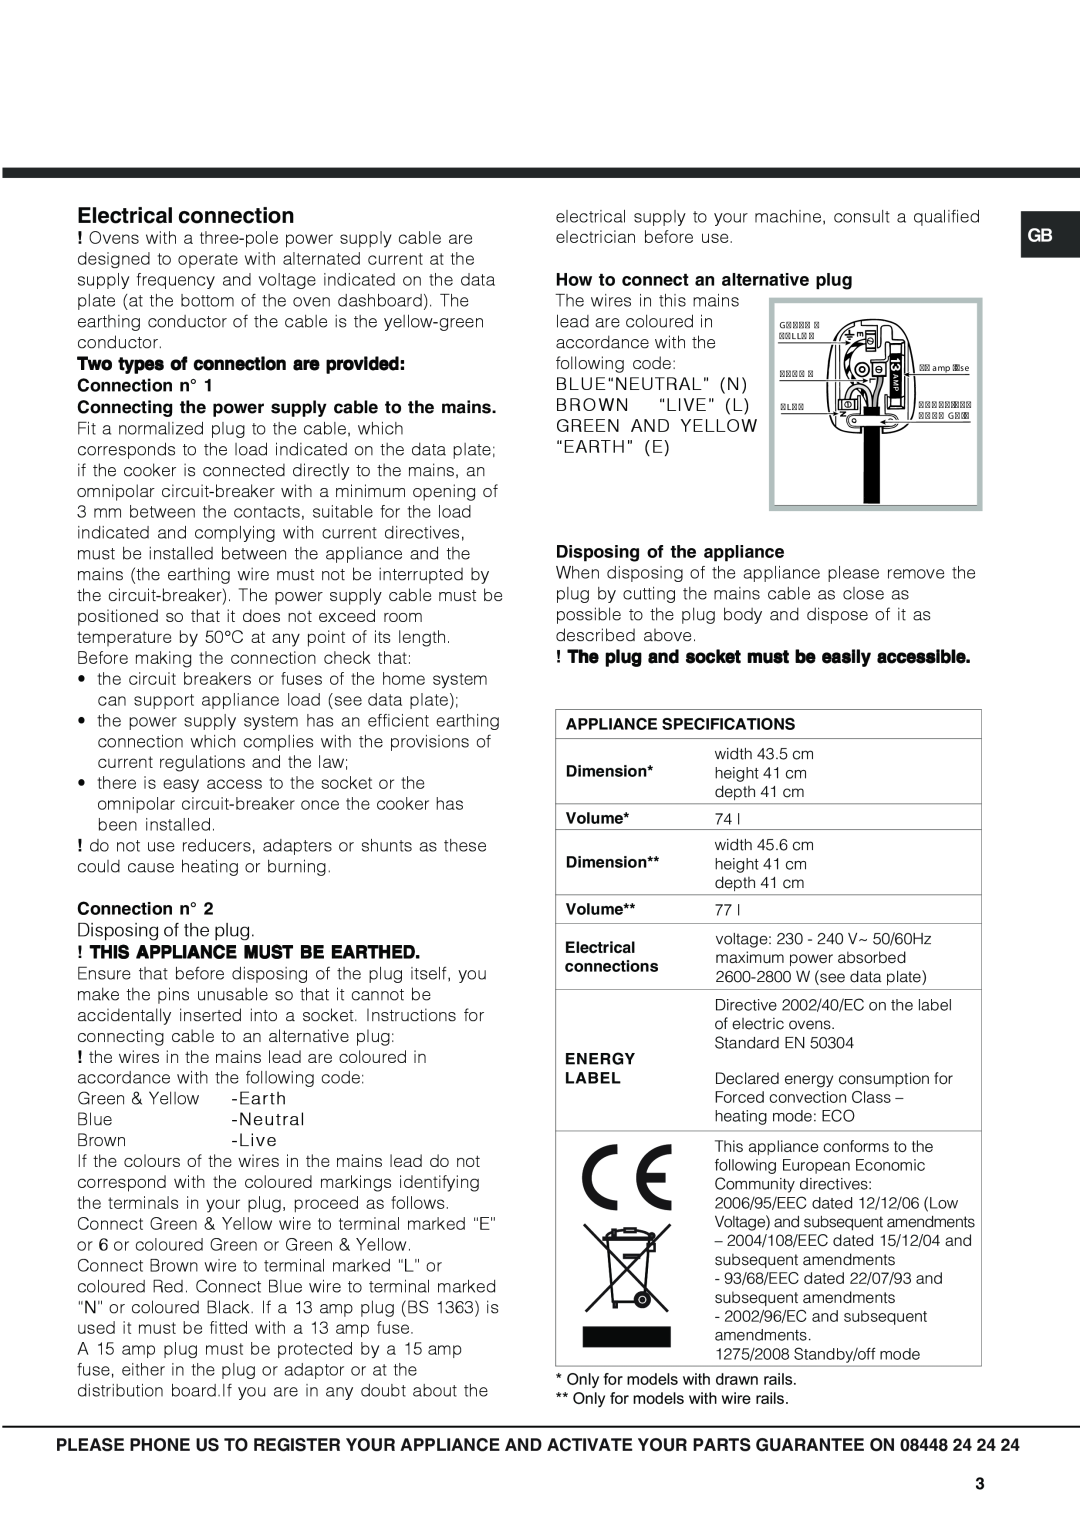 Hotpoint OSX 1036U D CX, OSX 1036N D CX manual Electrical connection, The plug and socket must be easily accessible 